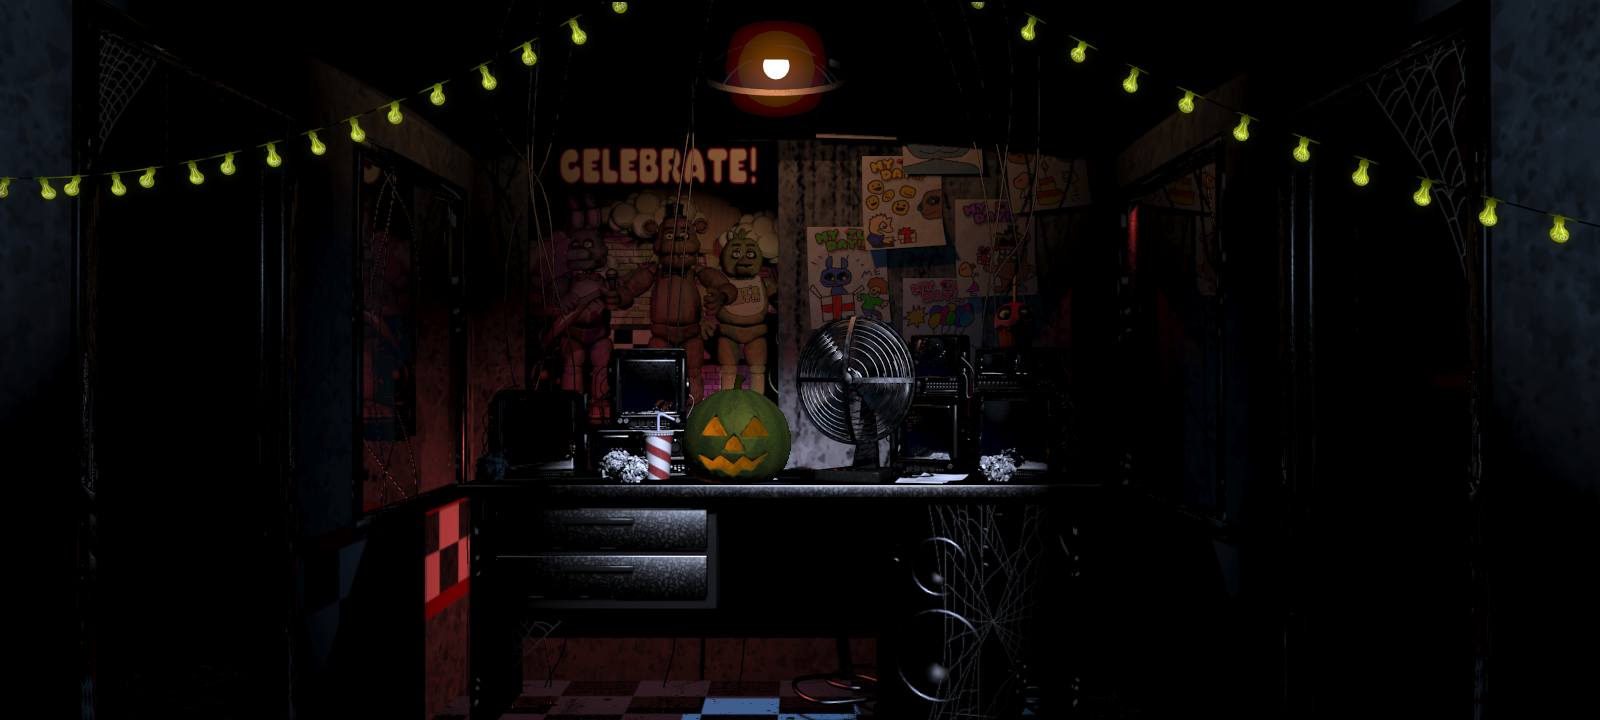 Five Nights At Freddy's 4 Halloween edition